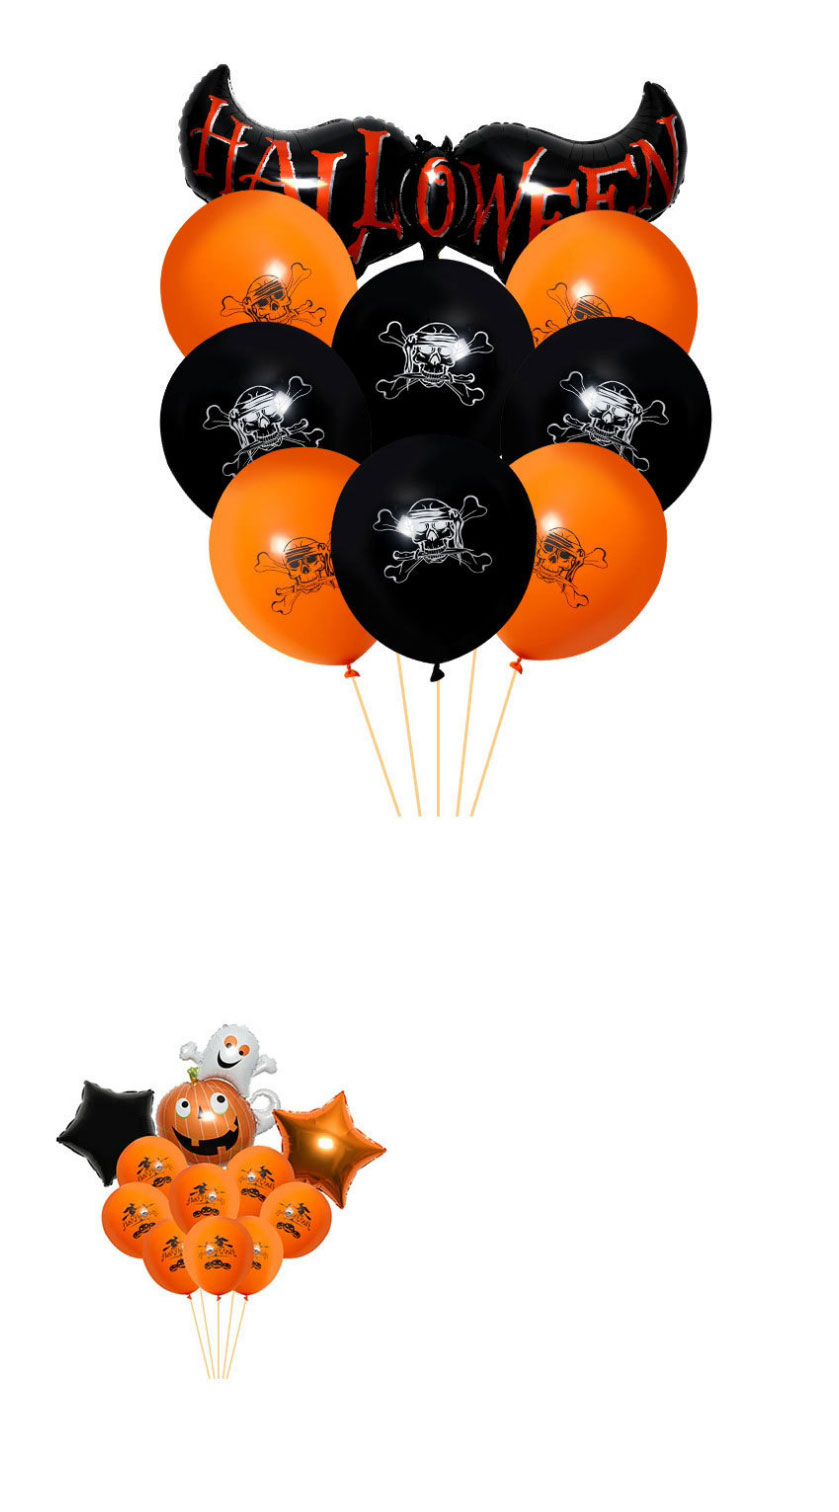 Fashion Balloon Combination 7 Halloween Printing Thickened Balloon Set,Festival & Party Supplies